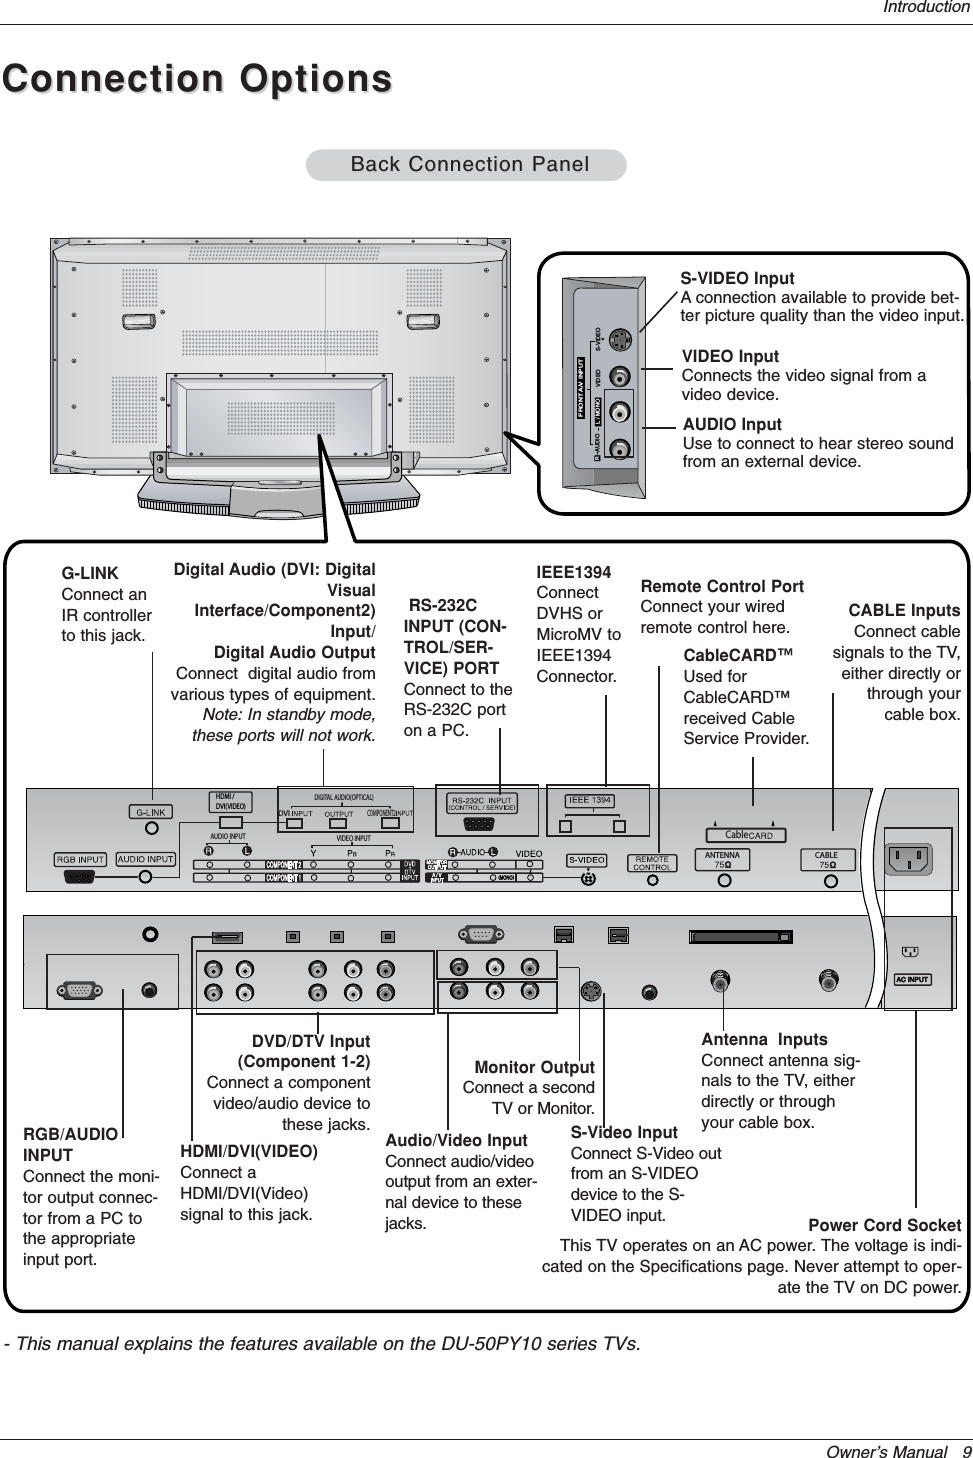 Owner’s Manual   9IntroductionConnection OptionsConnection OptionsRS-VIDEOVIDEO L / MONO AUDIOFRONT A/V INPUTDVICOMPONENT2DIGITAL AUDIO(OPTICAL)VIDEO INPUTAUDIO INPUTCABLEHDMI /DVI(VIDEO)CableANTENNAAC INPUTAC INPUTBack Connection PanelBack Connection PanelAntenna  InputsConnect antenna sig-nals to the TV, eitherdirectly or throughyour cable box.RGB/AUDIOINPUTConnect the moni-tor output connec-tor from a PC tothe appropriateinput port.Digital Audio (DVI: DigitalVisualInterface/Component2)Input/Digital Audio OutputConnect  digital audio fromvarious types of equipment.Note: In standby mode, these ports will not work.DVD/DTV Input(Component 1-2)Connect a componentvideo/audio device tothese jacks.Monitor OutputConnect a secondTV or Monitor.Remote Control PortConnect your wiredremote control here.S-Video InputConnect S-Video outfrom an S-VIDEOdevice to the S-VIDEO input.IEEE1394ConnectDVHS orMicroMV toIEEE1394Connector.CABLE InputsConnect cablesignals to the TV,either directly orthrough yourcable box.RS-232CINPUT (CON-TROL/SER-VICE) PORTConnect to theRS-232C porton a PC.CableCARD™Used forCableCARD™received CableService Provider.G-LINKConnect anIR controllerto this jack.HDMI/DVI(VIDEO)Connect aHDMI/DVI(Video)signal to this jack.S-VIDEO InputA connection available to provide bet-ter picture quality than the video input.VIDEO InputConnects the video signal from avideo device.AUDIO InputUse to connect to hear stereo soundfrom an external device.Power Cord SocketThis TV operates on an AC power. The voltage is indi-cated on the Specifications page. Never attempt to oper-ate the TV on DC power.Audio/Video InputConnect audio/videooutput from an exter-nal device to thesejacks.- This manual explains the features available on the DU-50PY10 series TVs.